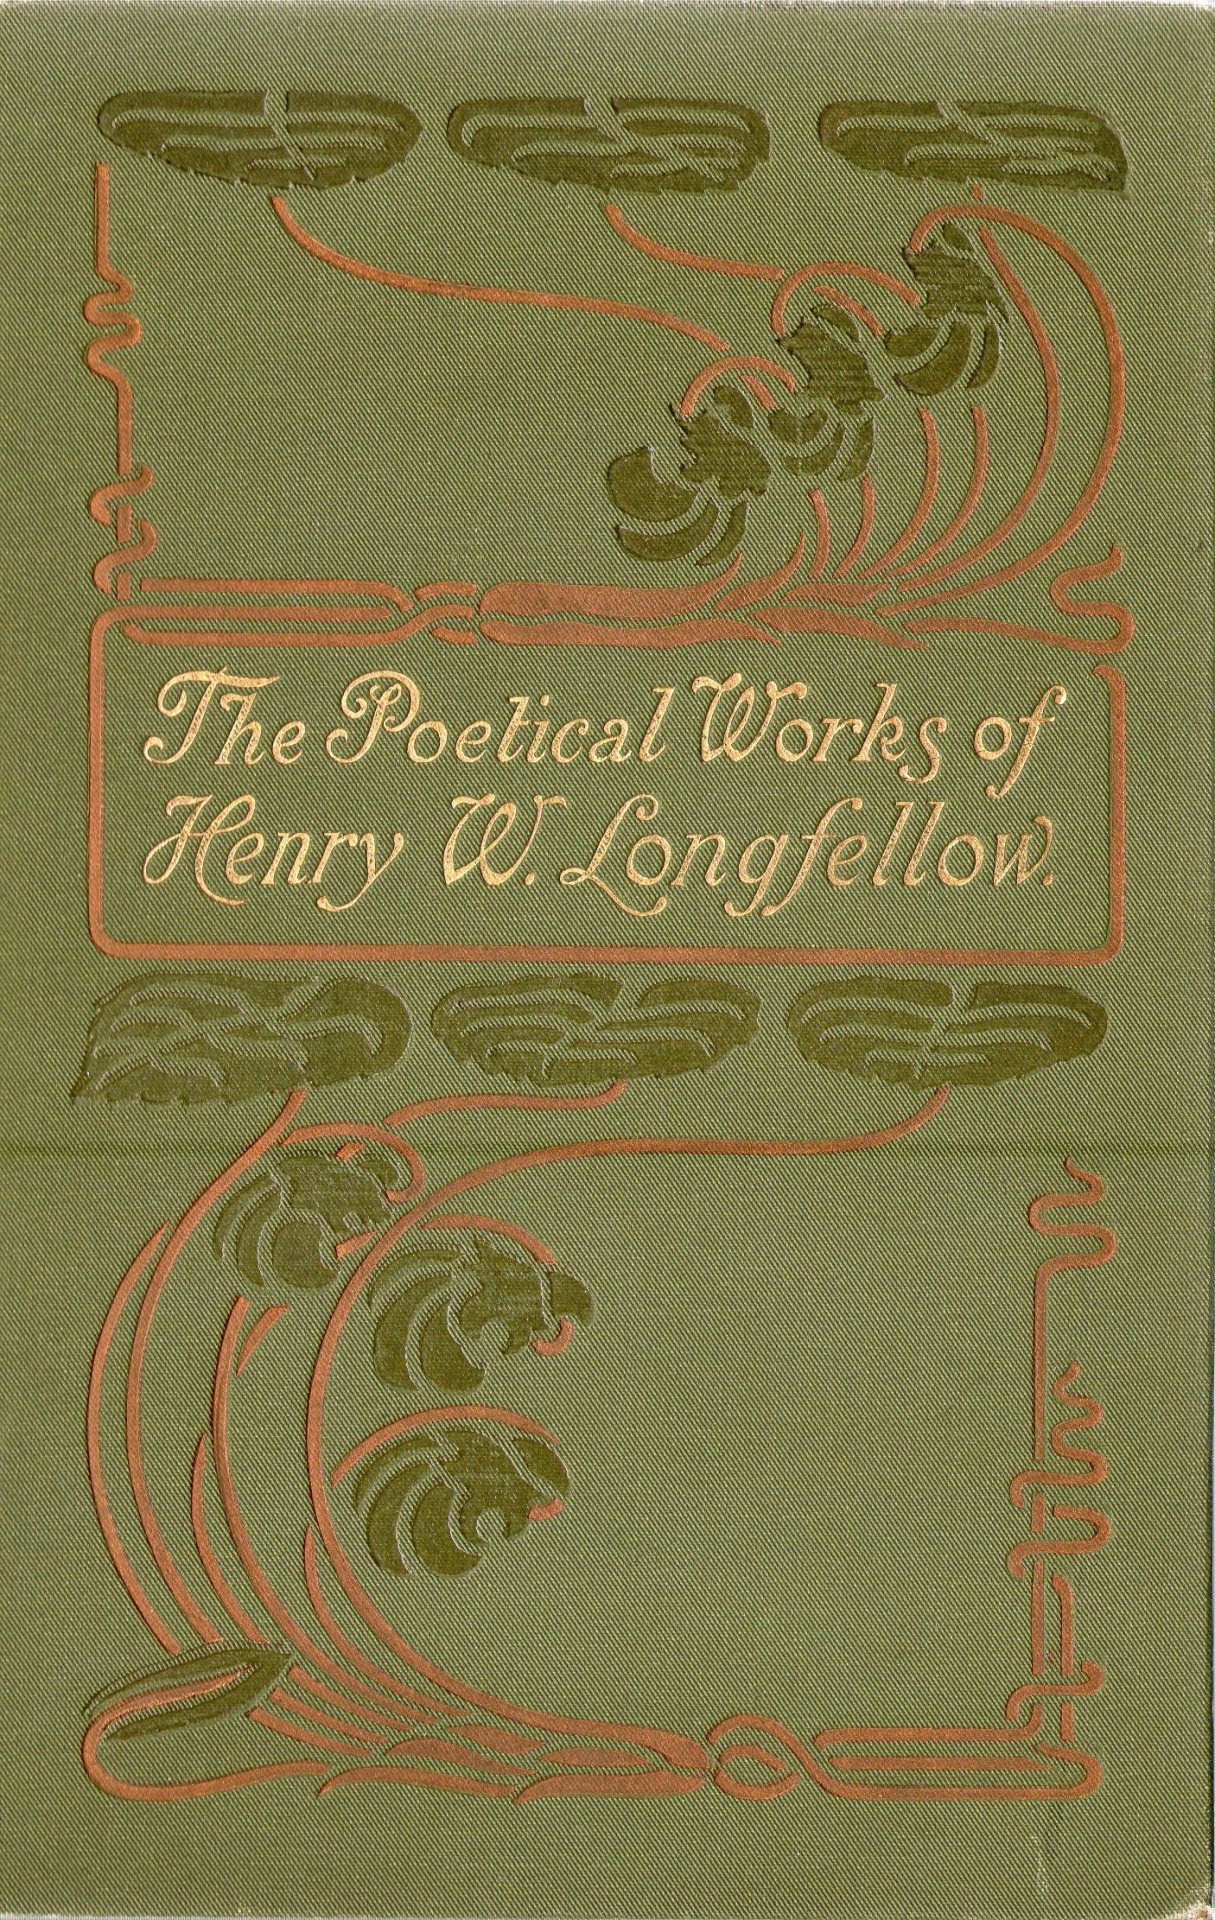 Old Books & Things.. — Art Nouveau book cover designs c1900